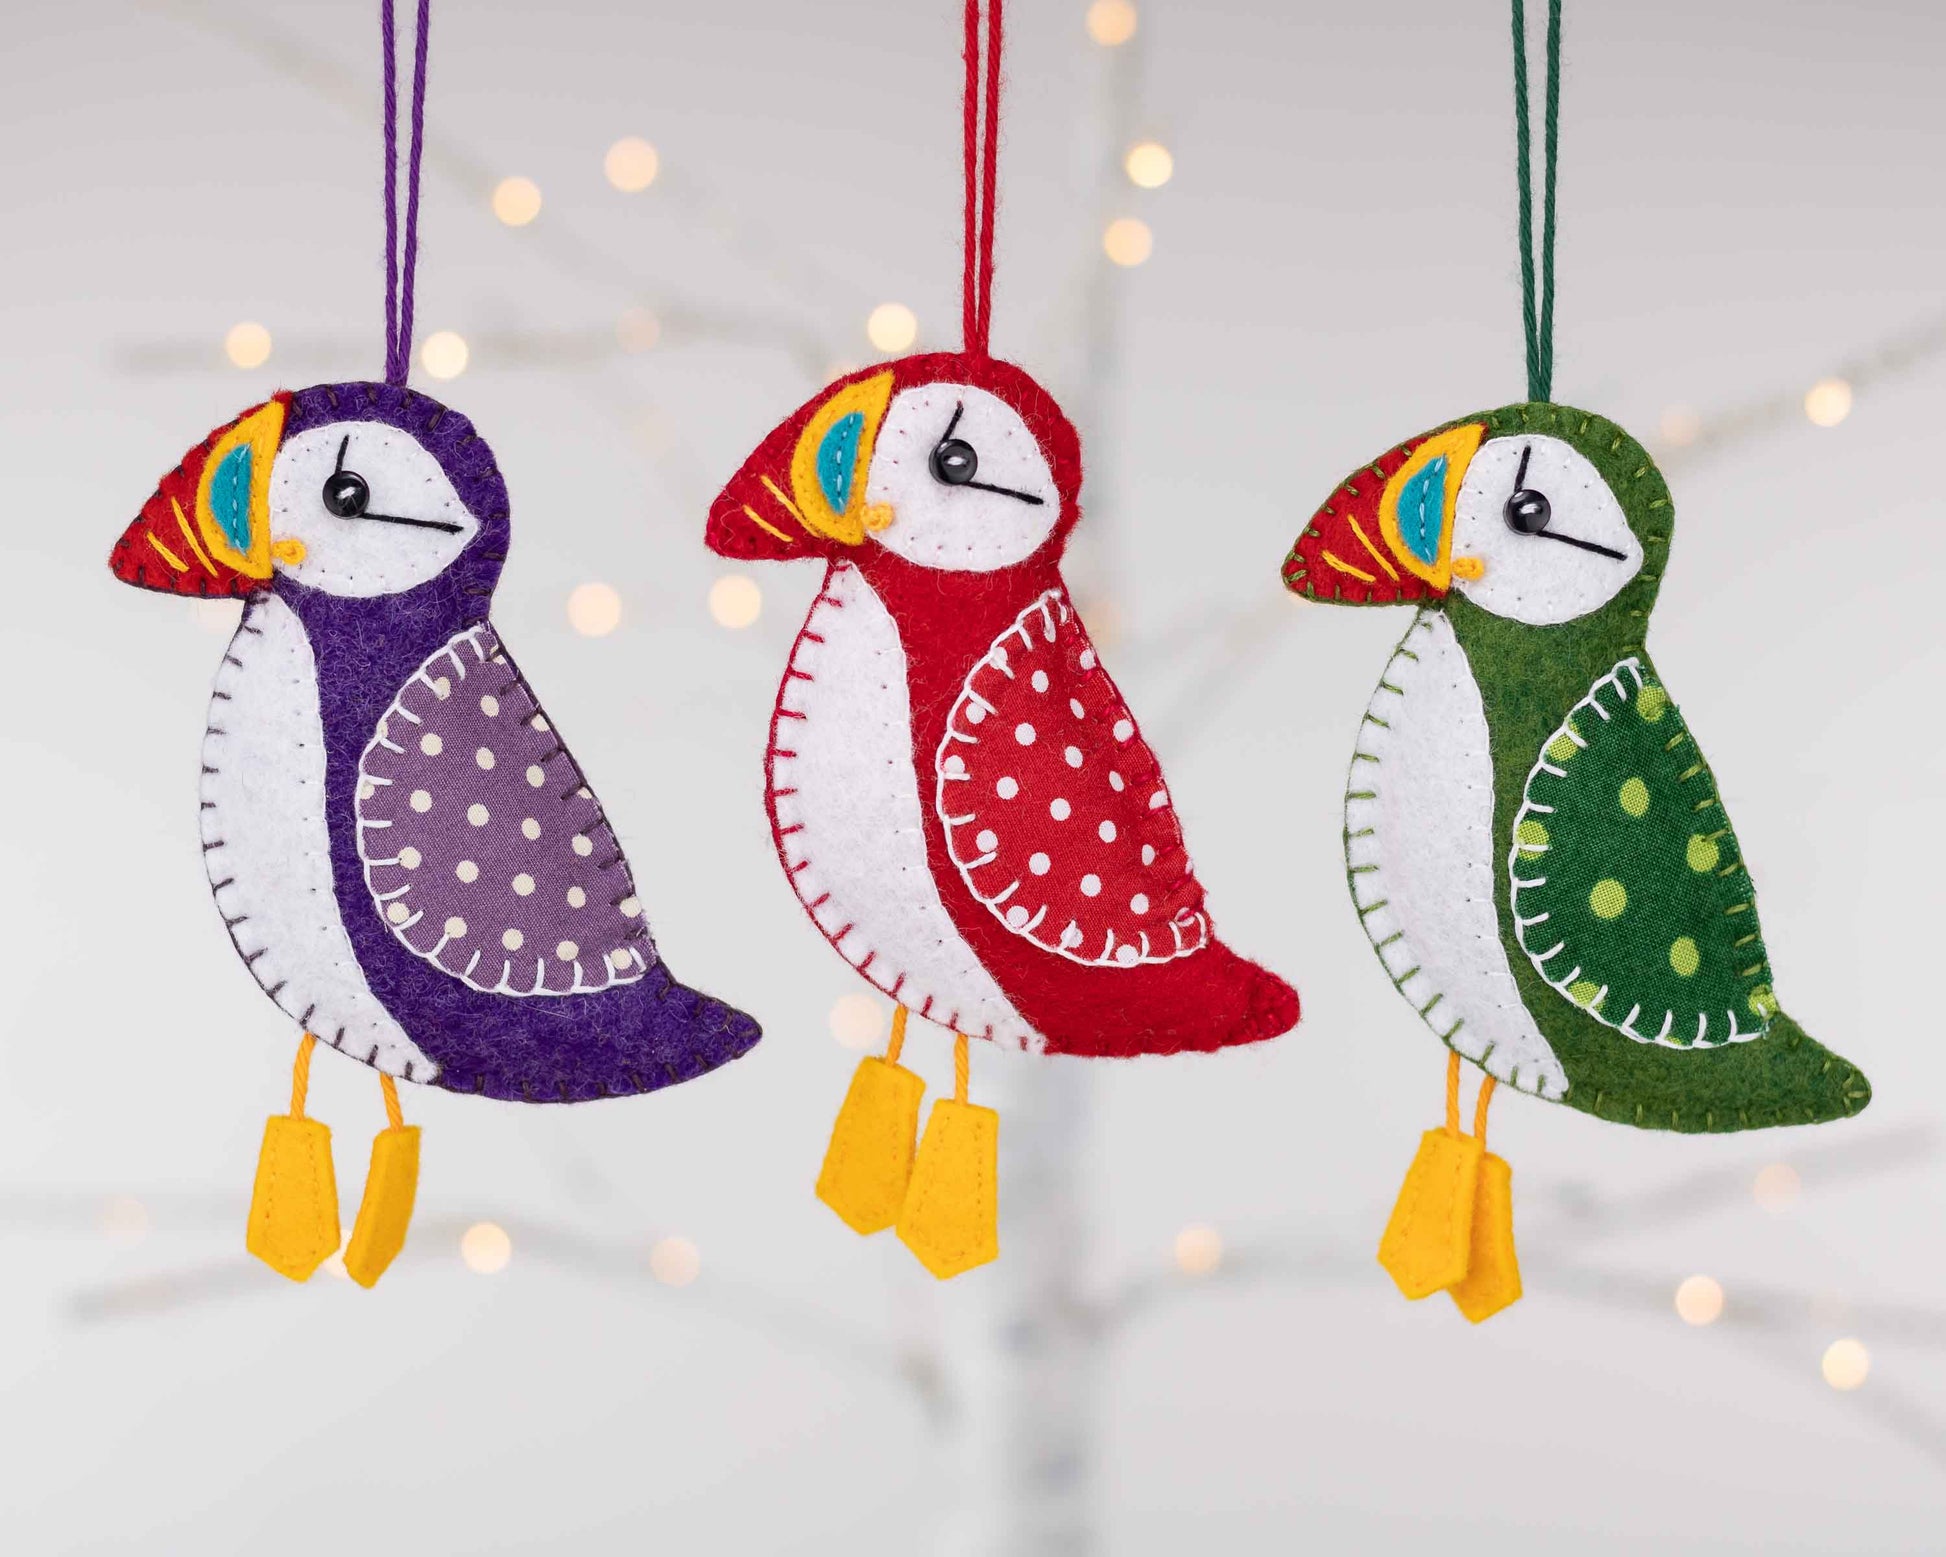 Set of 3 Retro Style Felt Christmas Ornaments – Tilly & Puffin